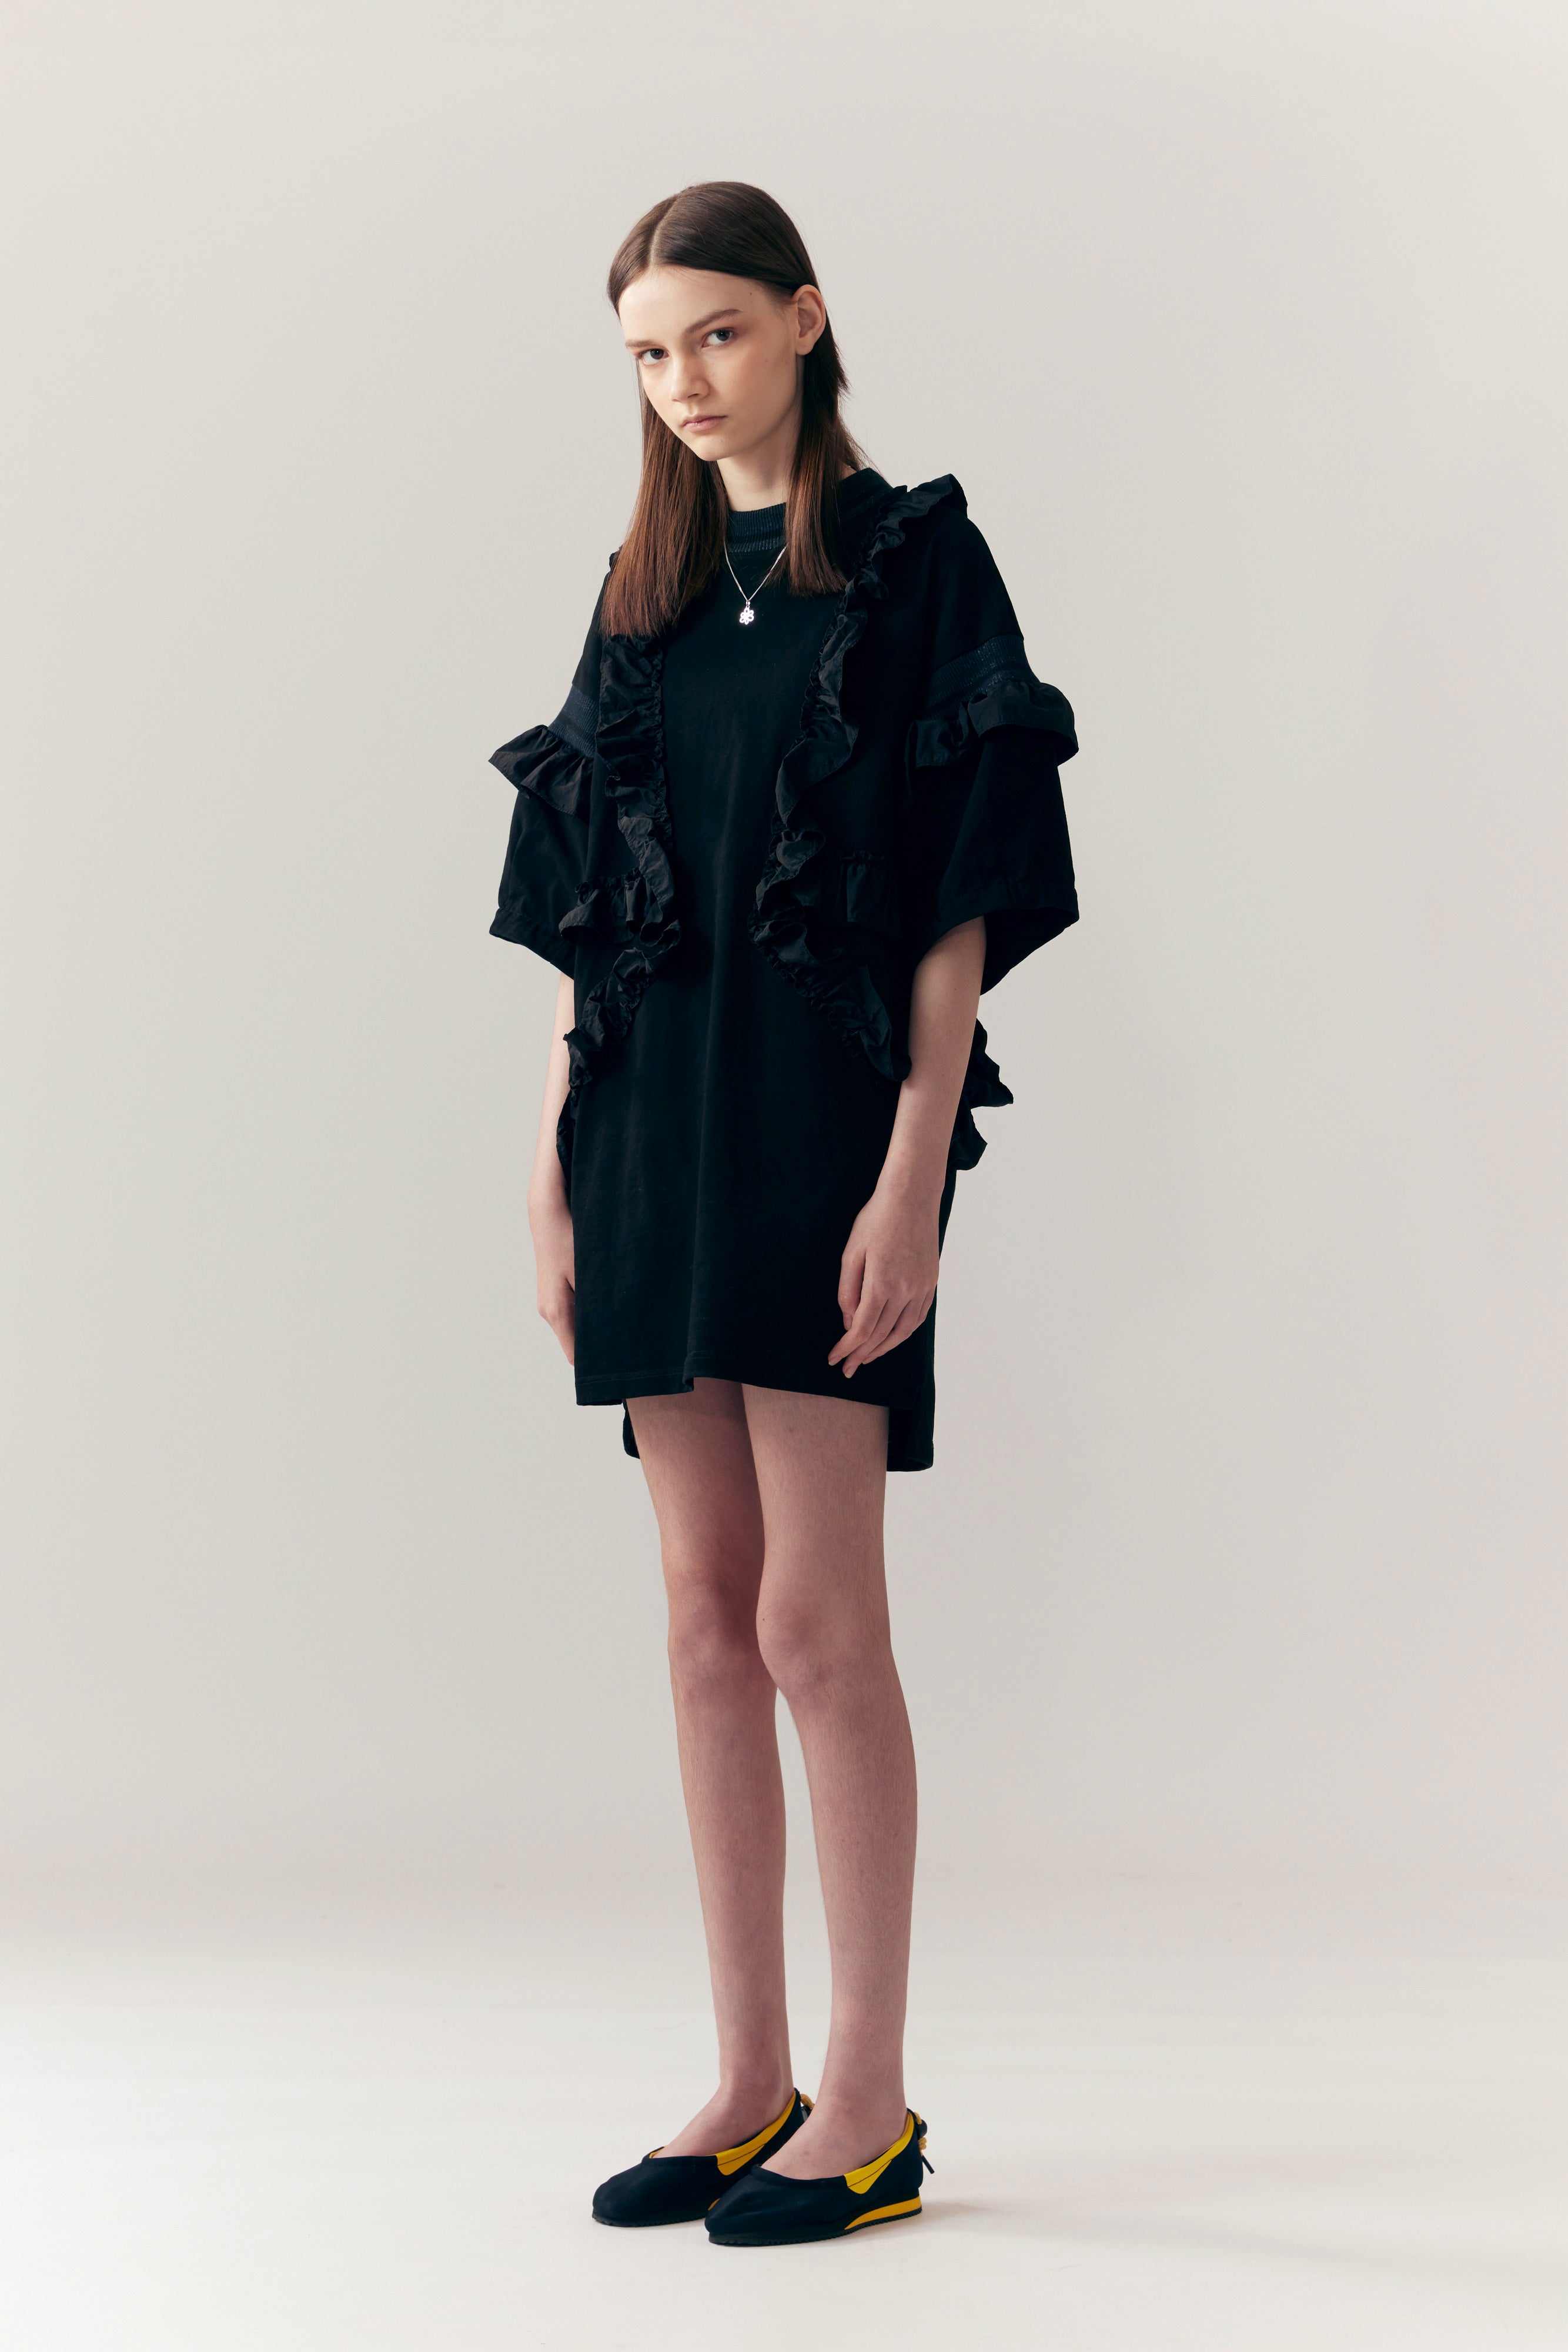 The ELYSIA RUFFLE DRESS  available online with global shipping, and in PAM Stores Melbourne and Sydney.